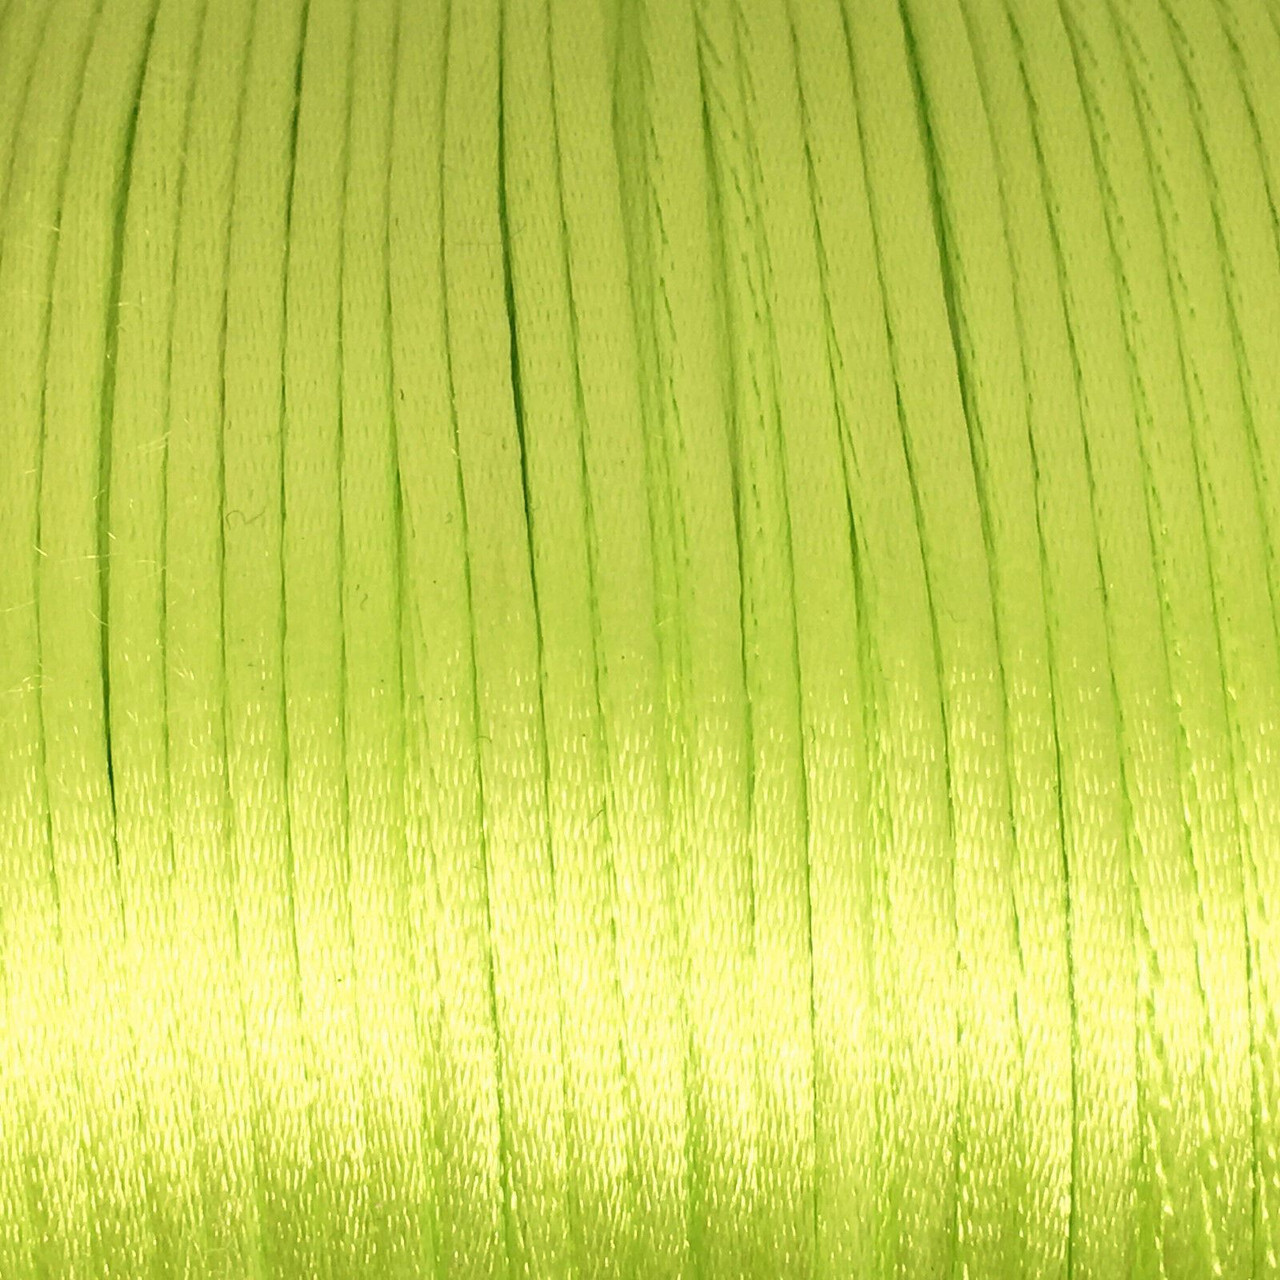 Reel of Nylon Cord (Rattail) - Apple Green, approx 225m